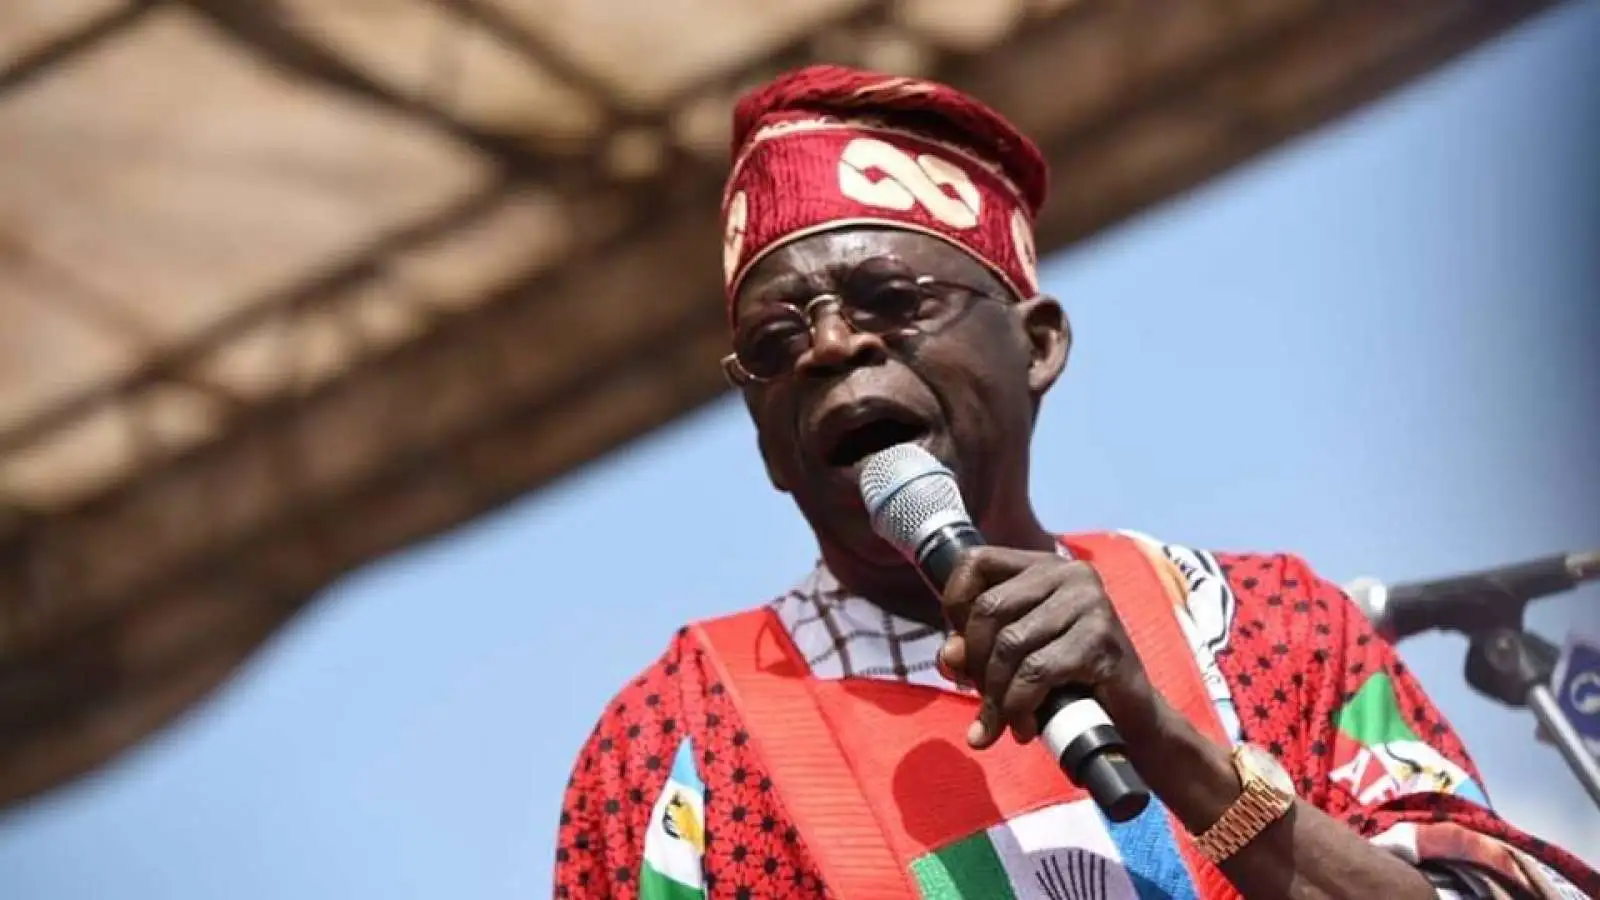 ‘Get your APV, APC and you must vote’ — Tinubu enmeshed in another gaffe at presidential rally